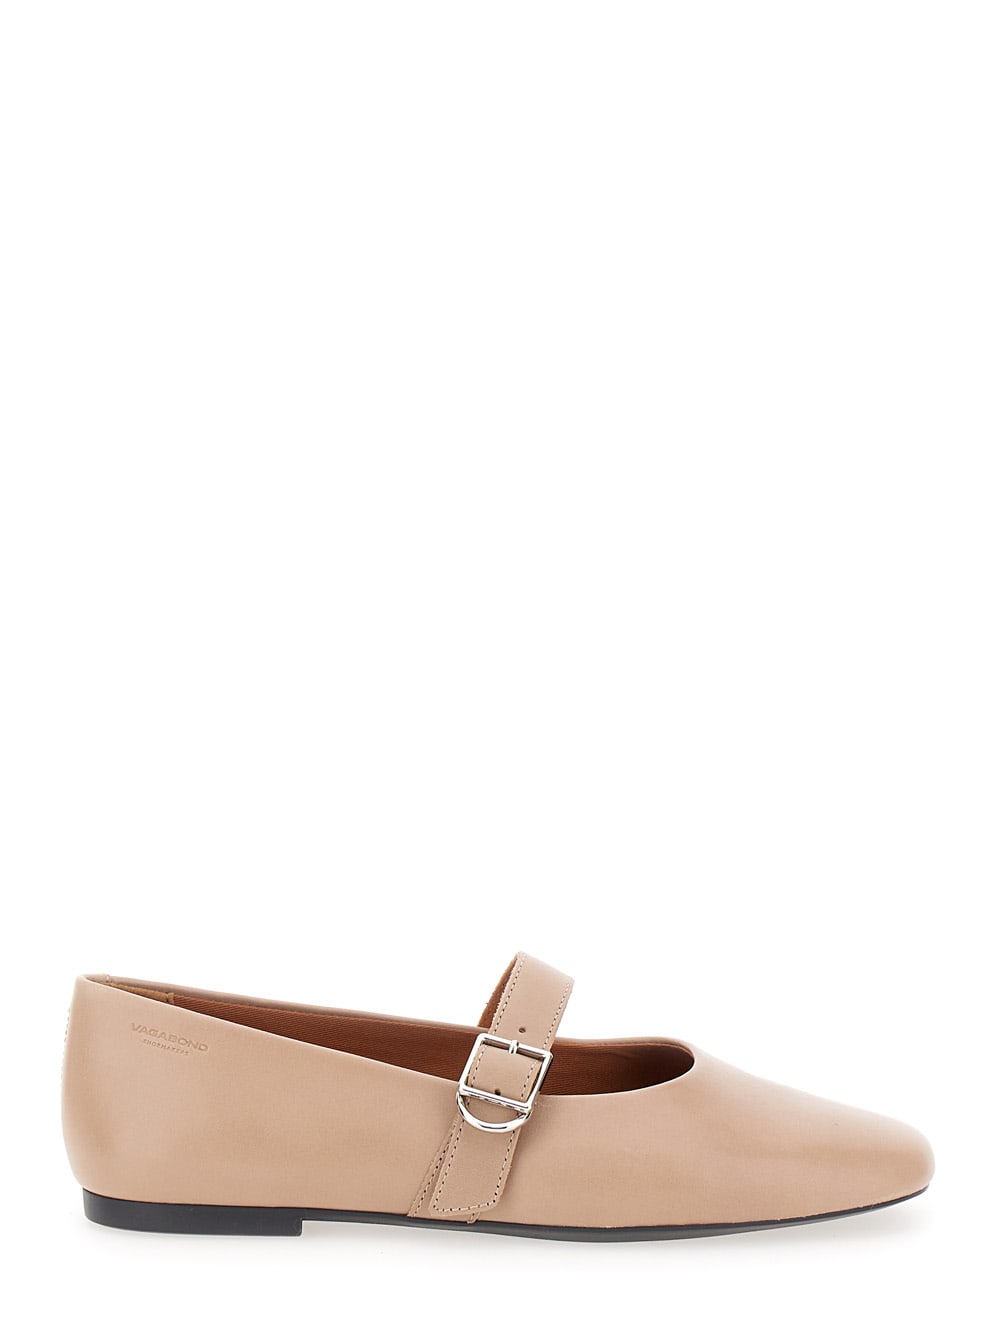 jolin Beige Ballet Flats With Strap In Smooth Leather Woman